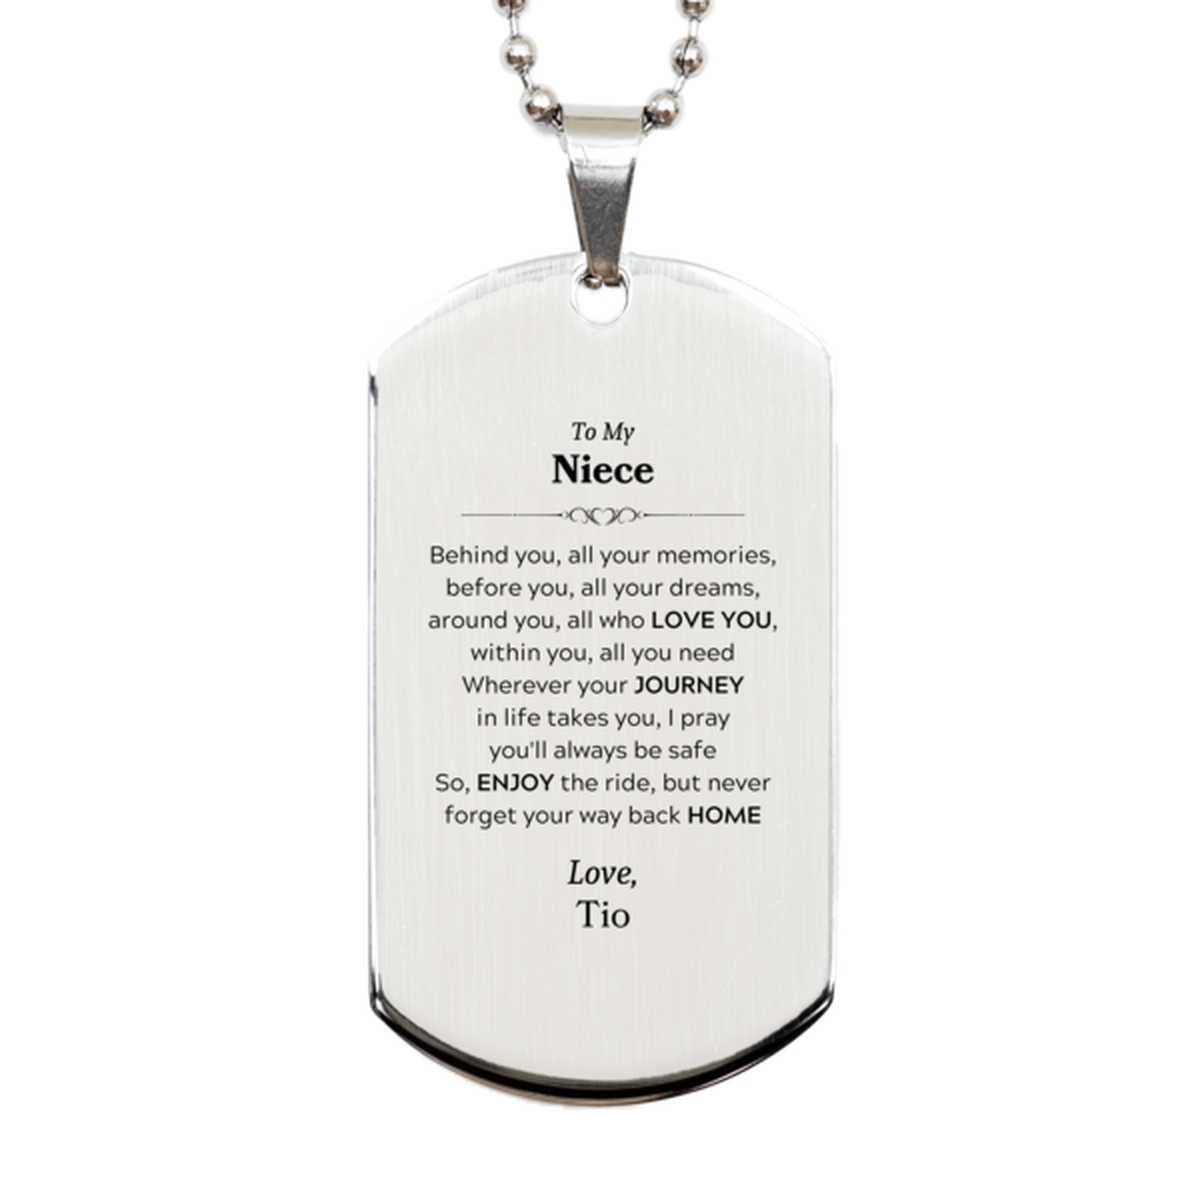 To My Niece Graduation Gifts from Tio, Niece Silver Dog Tag Christmas Birthday Gifts for Niece Behind you, all your memories, before you, all your dreams. Love, Tio